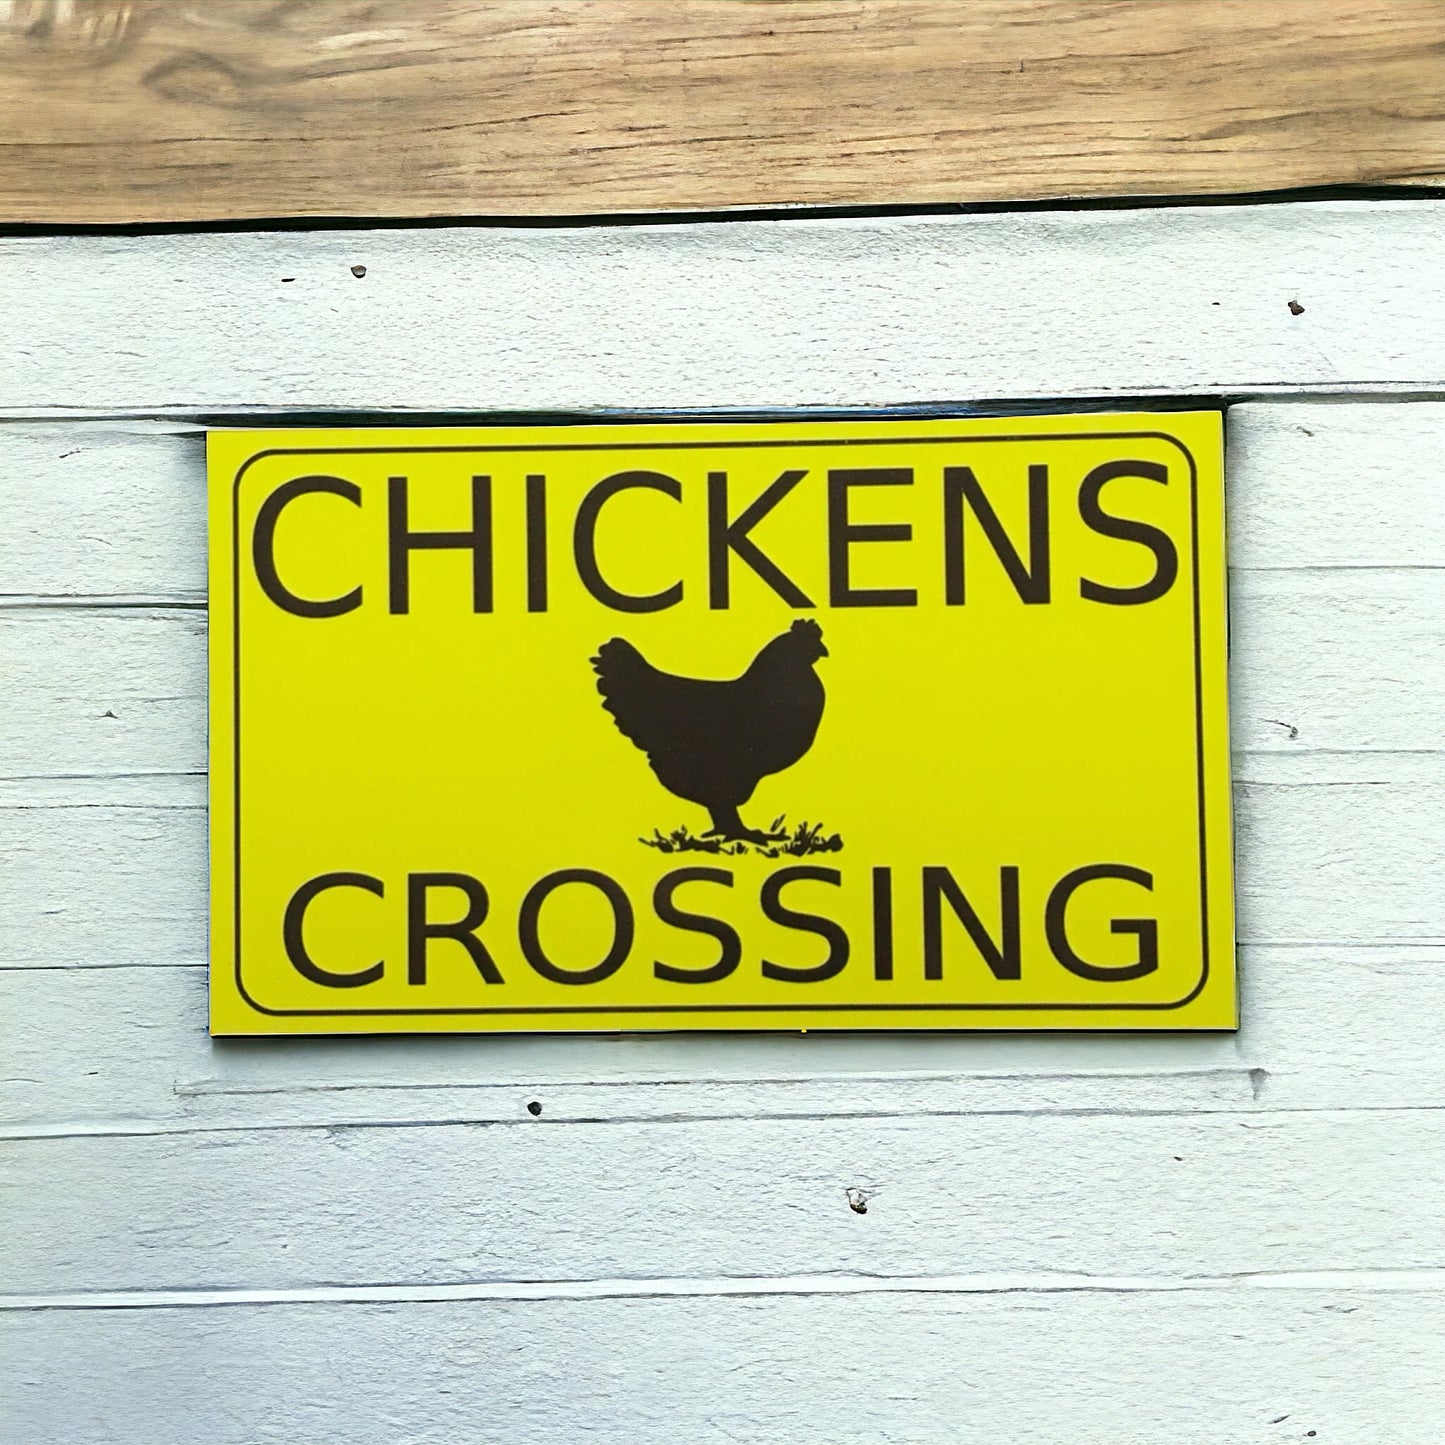 Chickens Crossing Sign